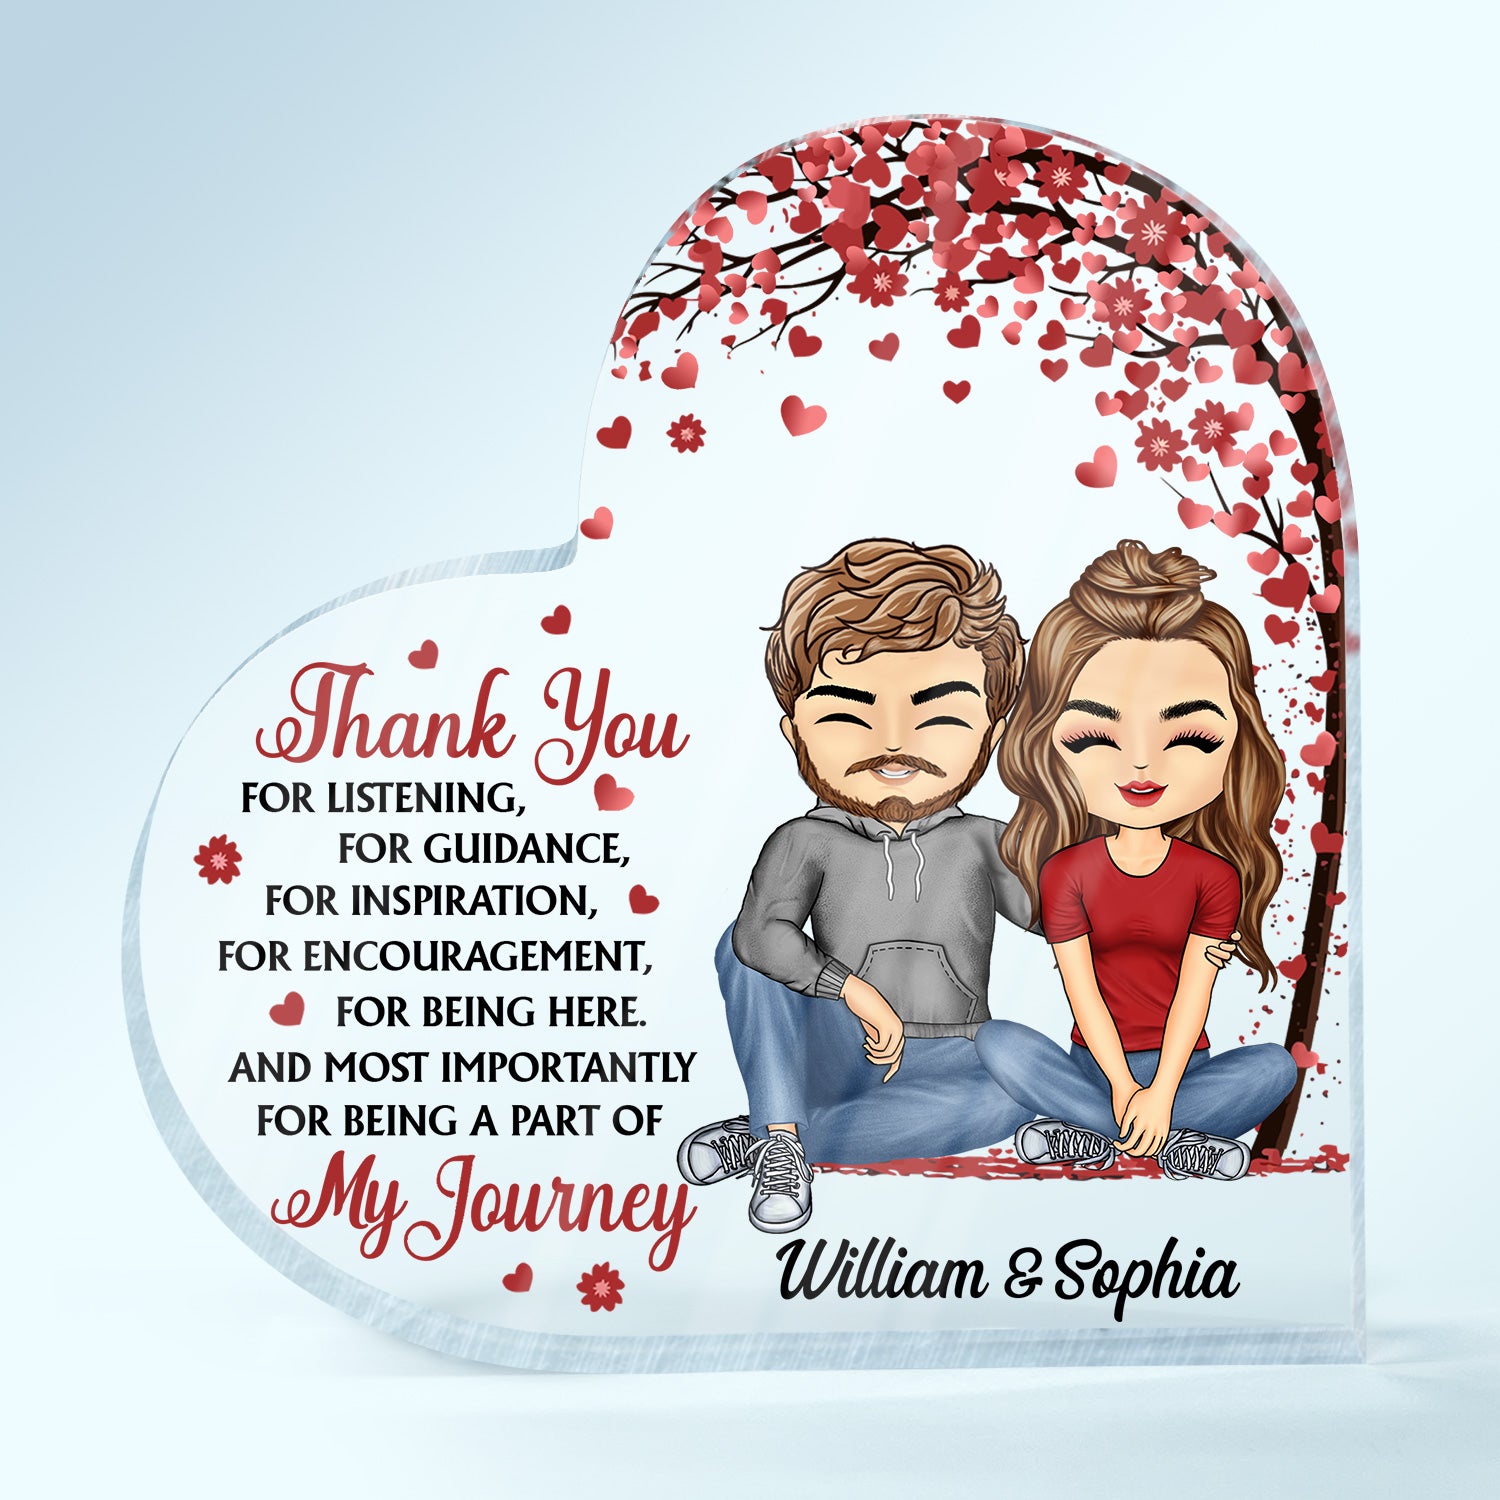 Thank You For Listening For Guidance For Inspiration Couples - Anniversary, Birthday Gift For Spouse, Husband, Wife, Boyfriend, Girlfriend - Personalized Custom Heart Shaped Acrylic Plaque